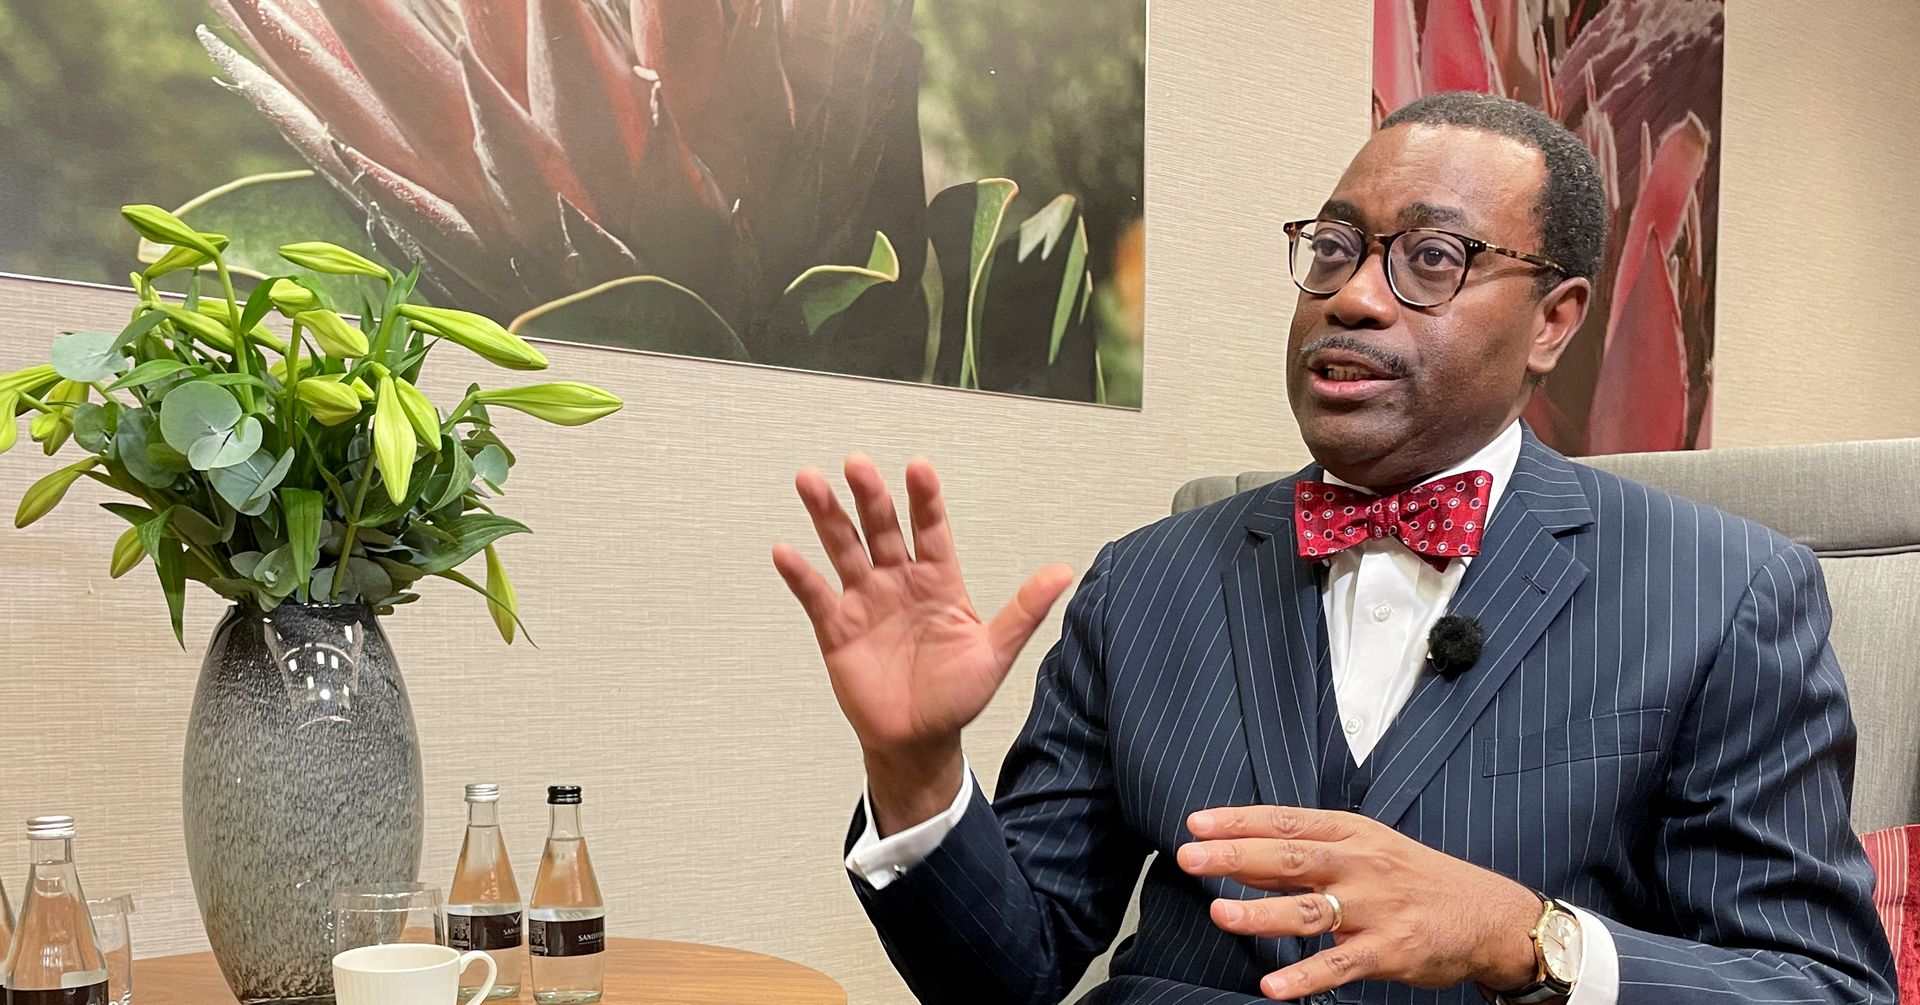 Ukraine war creates woes, but also an opportunity for Africa – AfDB Pres